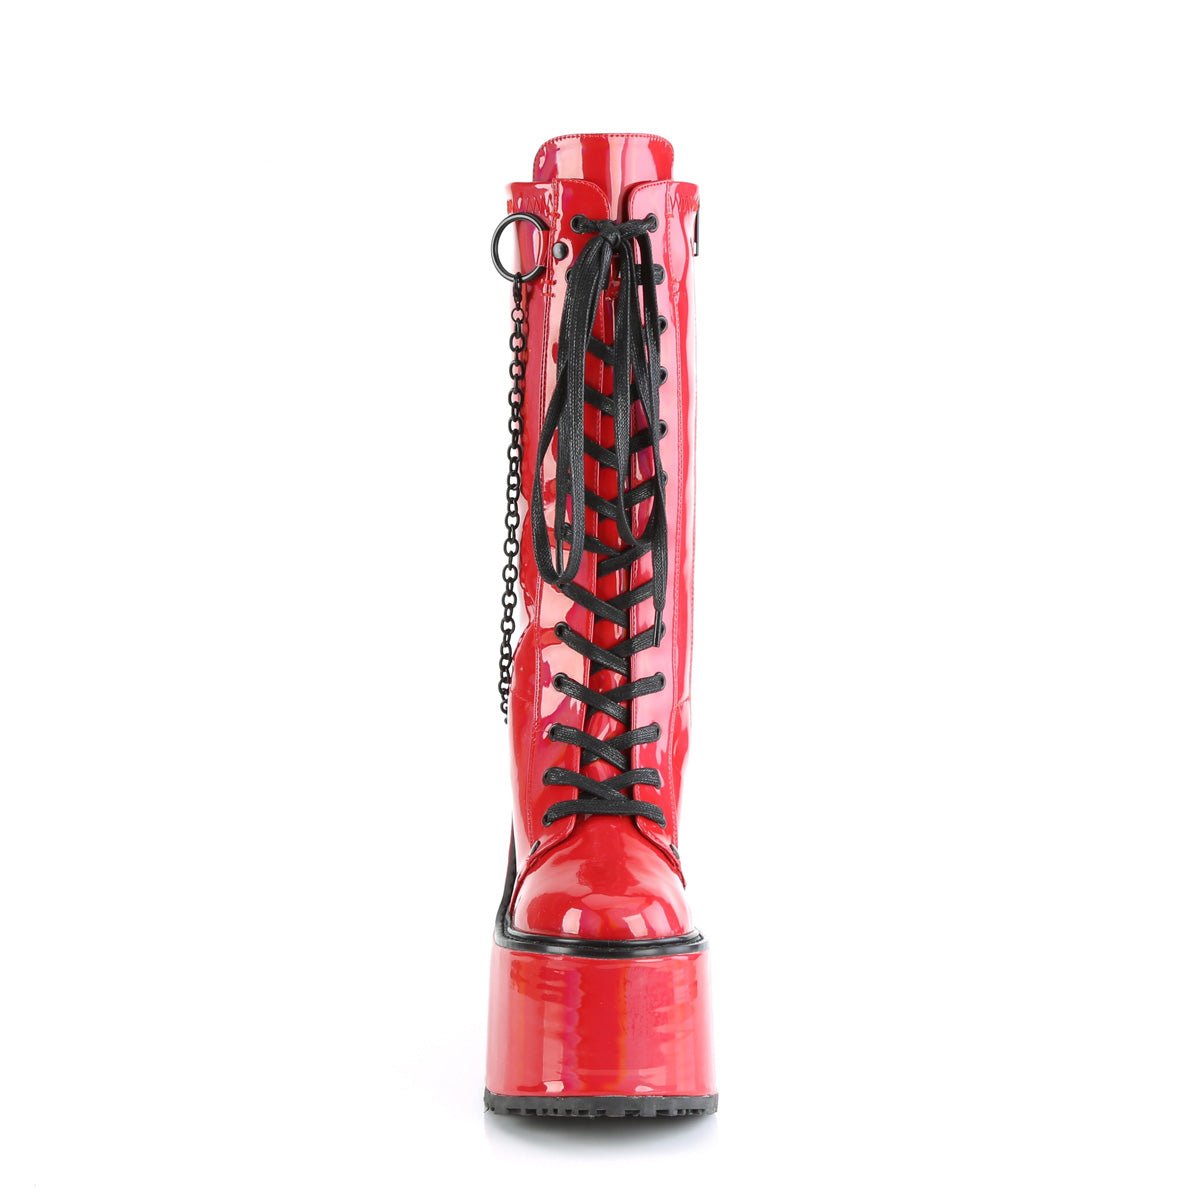 Too Fast | Demonia Swing 150 | Red Holographic Stretch Patent Leather Women's Knee High Boots